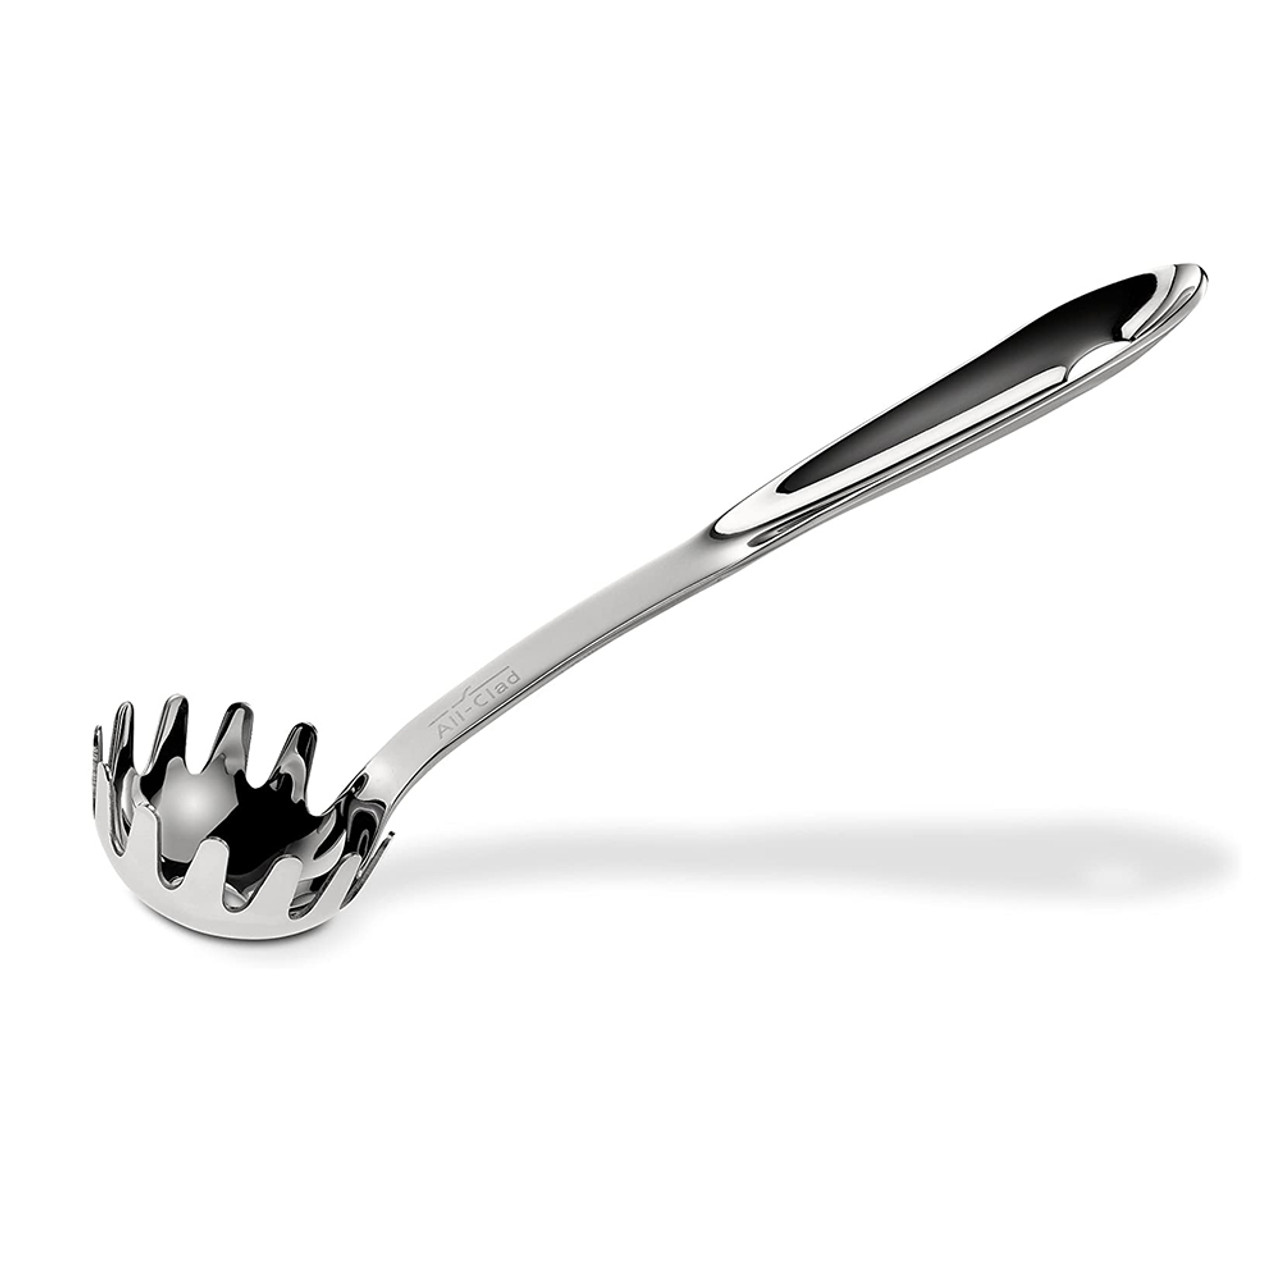 https://cdn11.bigcommerce.com/s-hccytny0od/images/stencil/1280x1280/products/3528/12603/all-clad-pasta-ladle__67570.1599661178.jpg?c=2?imbypass=on